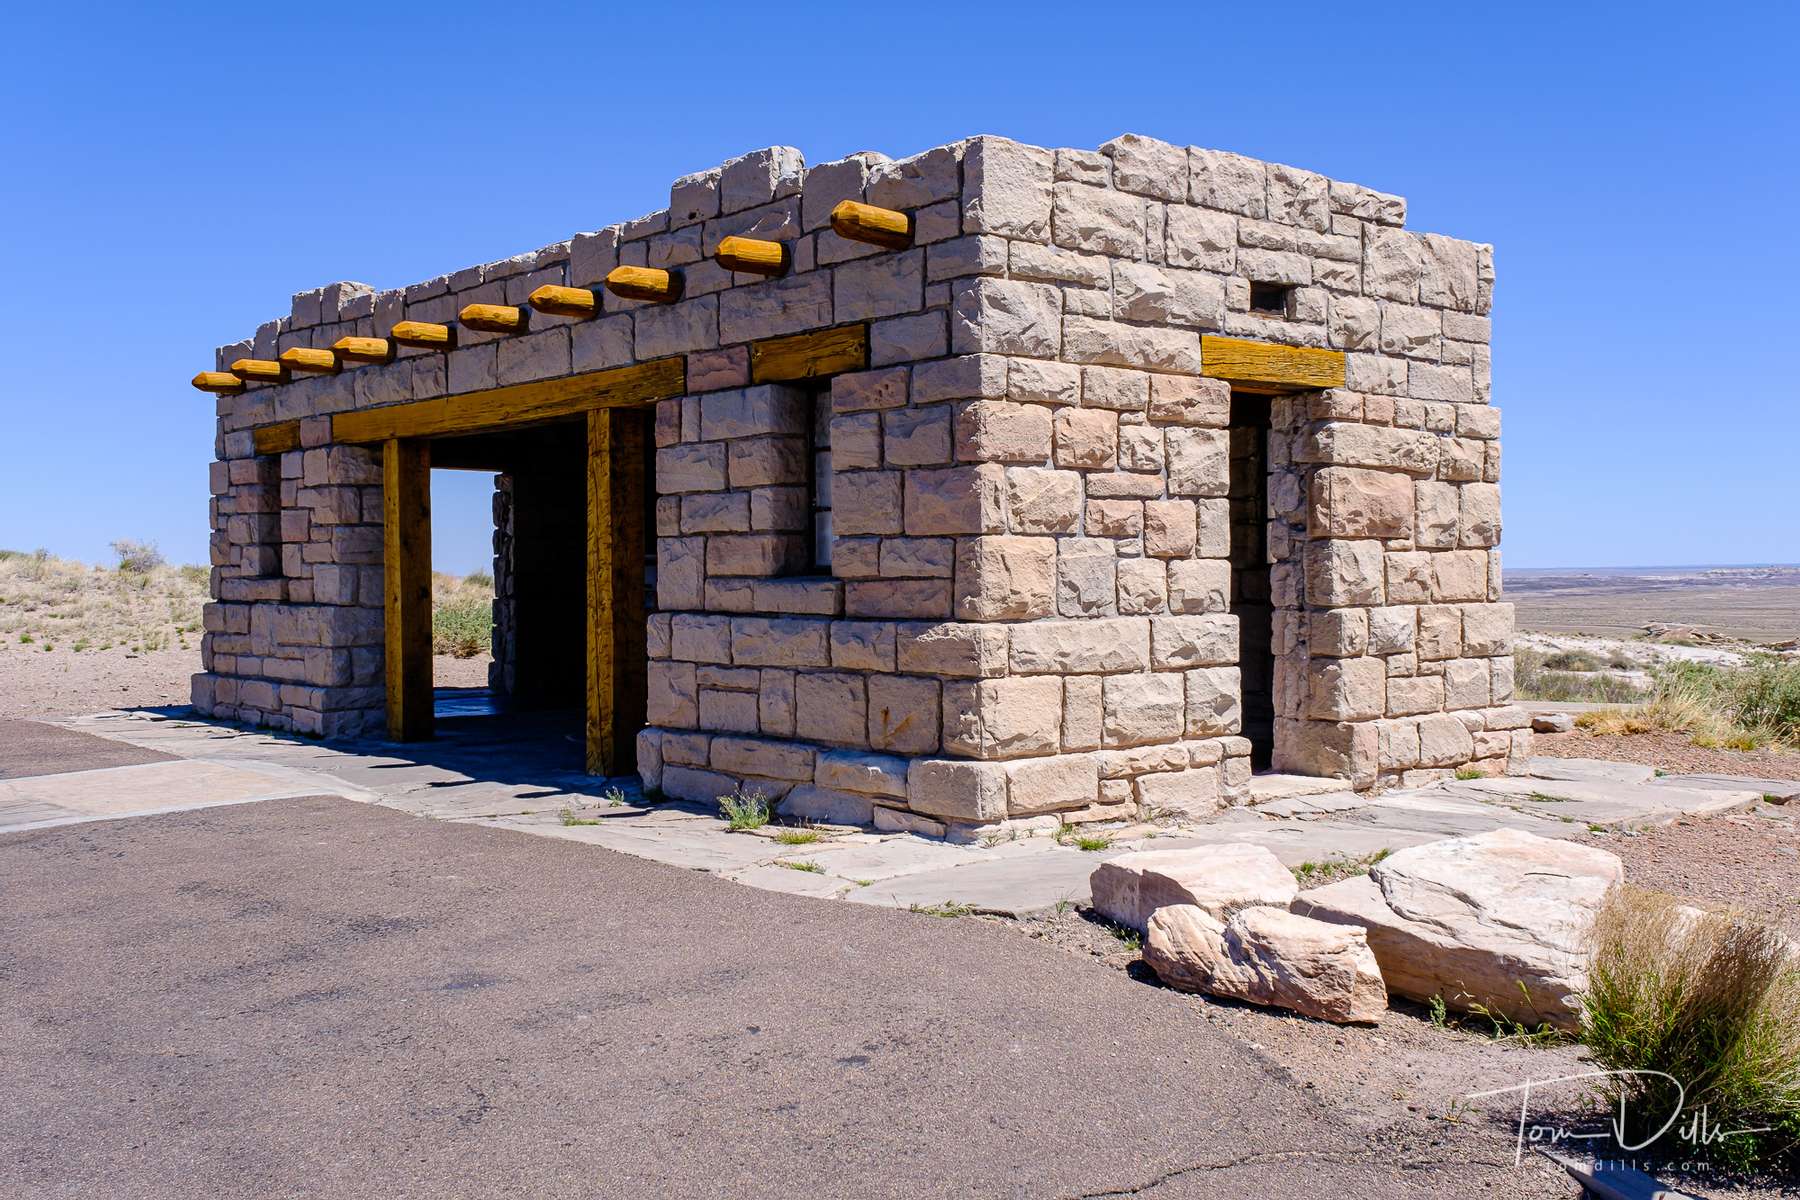 Restored visitor center building in The Painted Desert, part of Petrified Forest National Park in Arizona